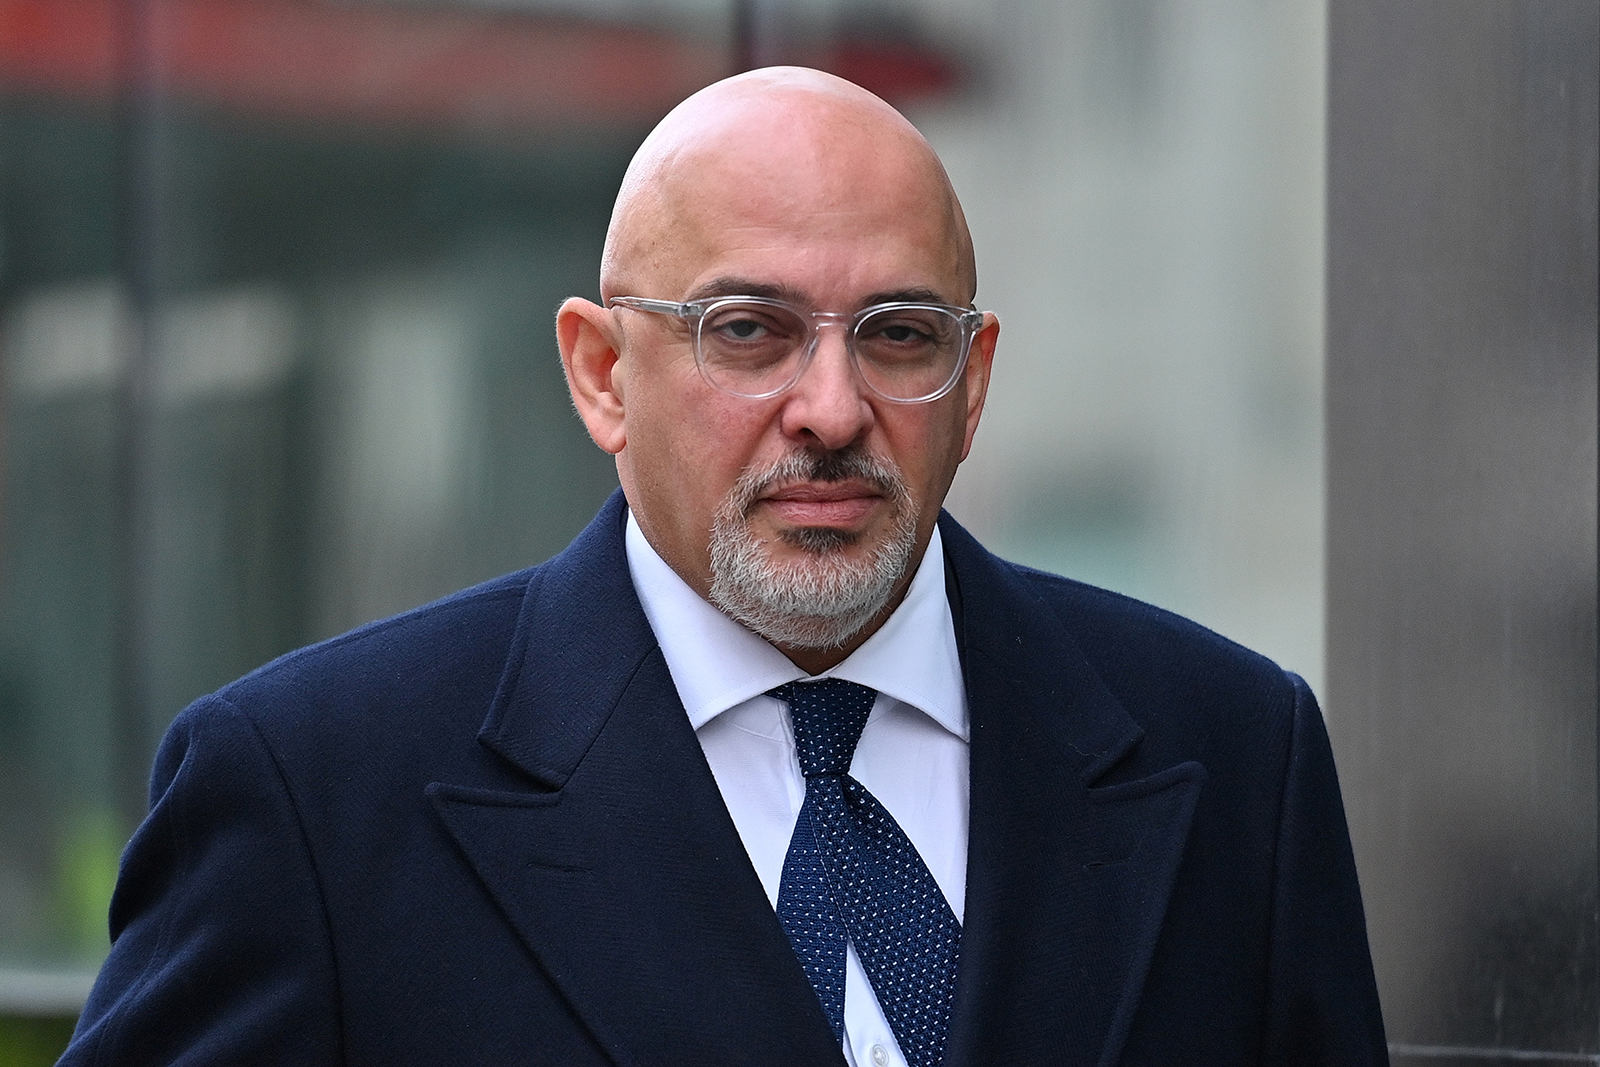 Britain's Parliamentary Under Secretary of State at the Department of Health and Social Care, Nadhim Zahawi, is seen in London, on December 2, 2020